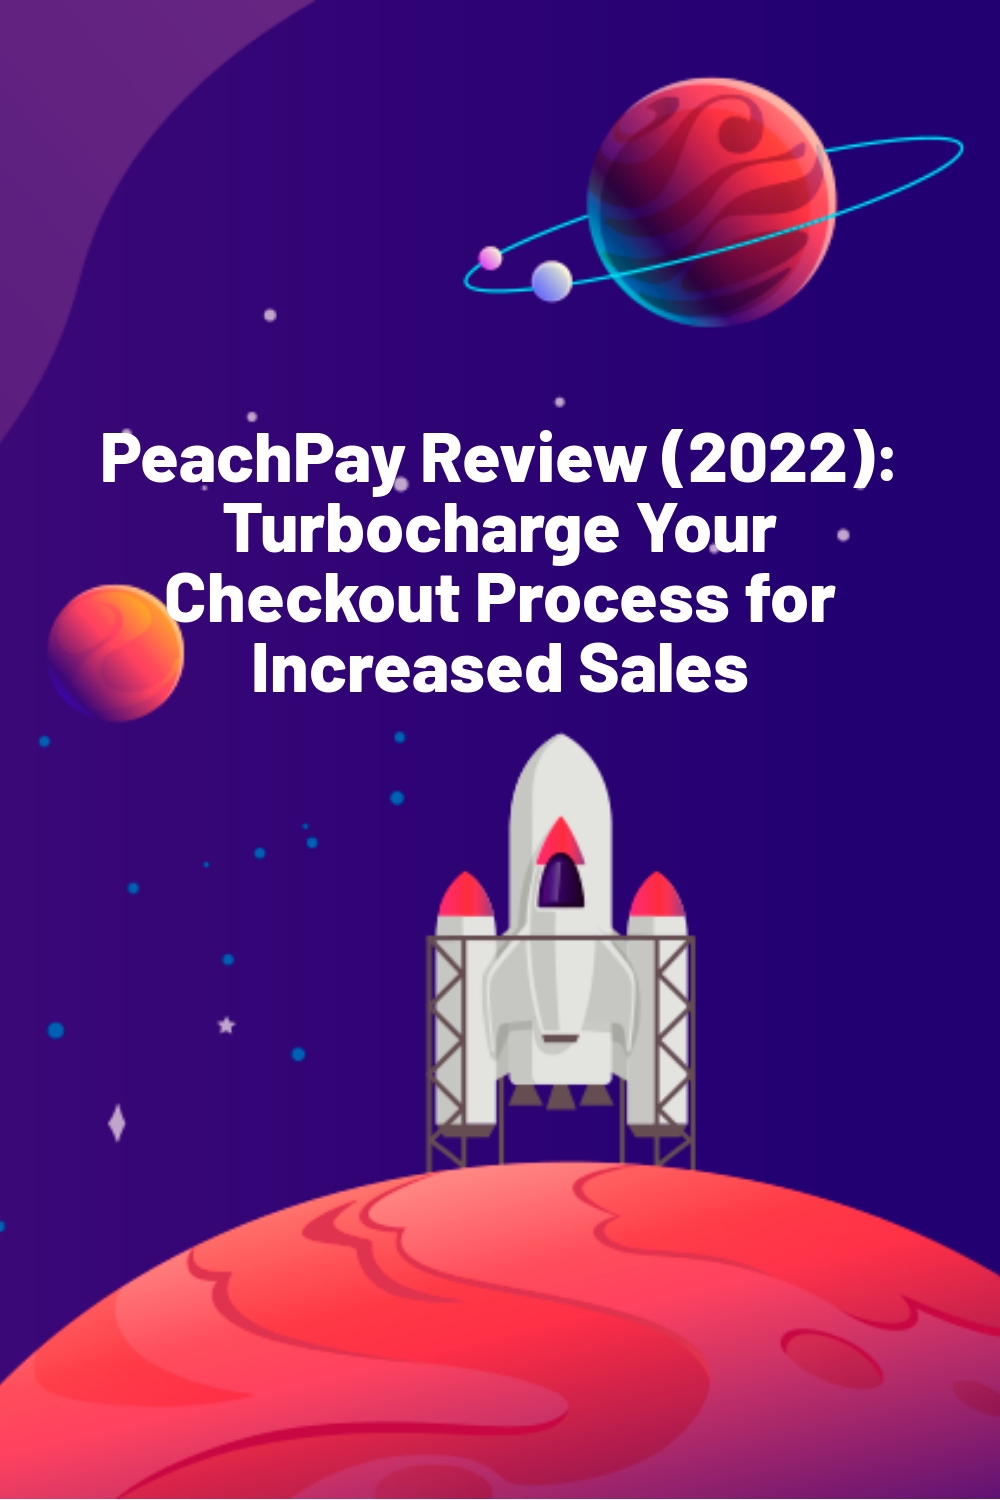 PeachPay Review (2022): Turbocharge Your Checkout Process for Increased Sales